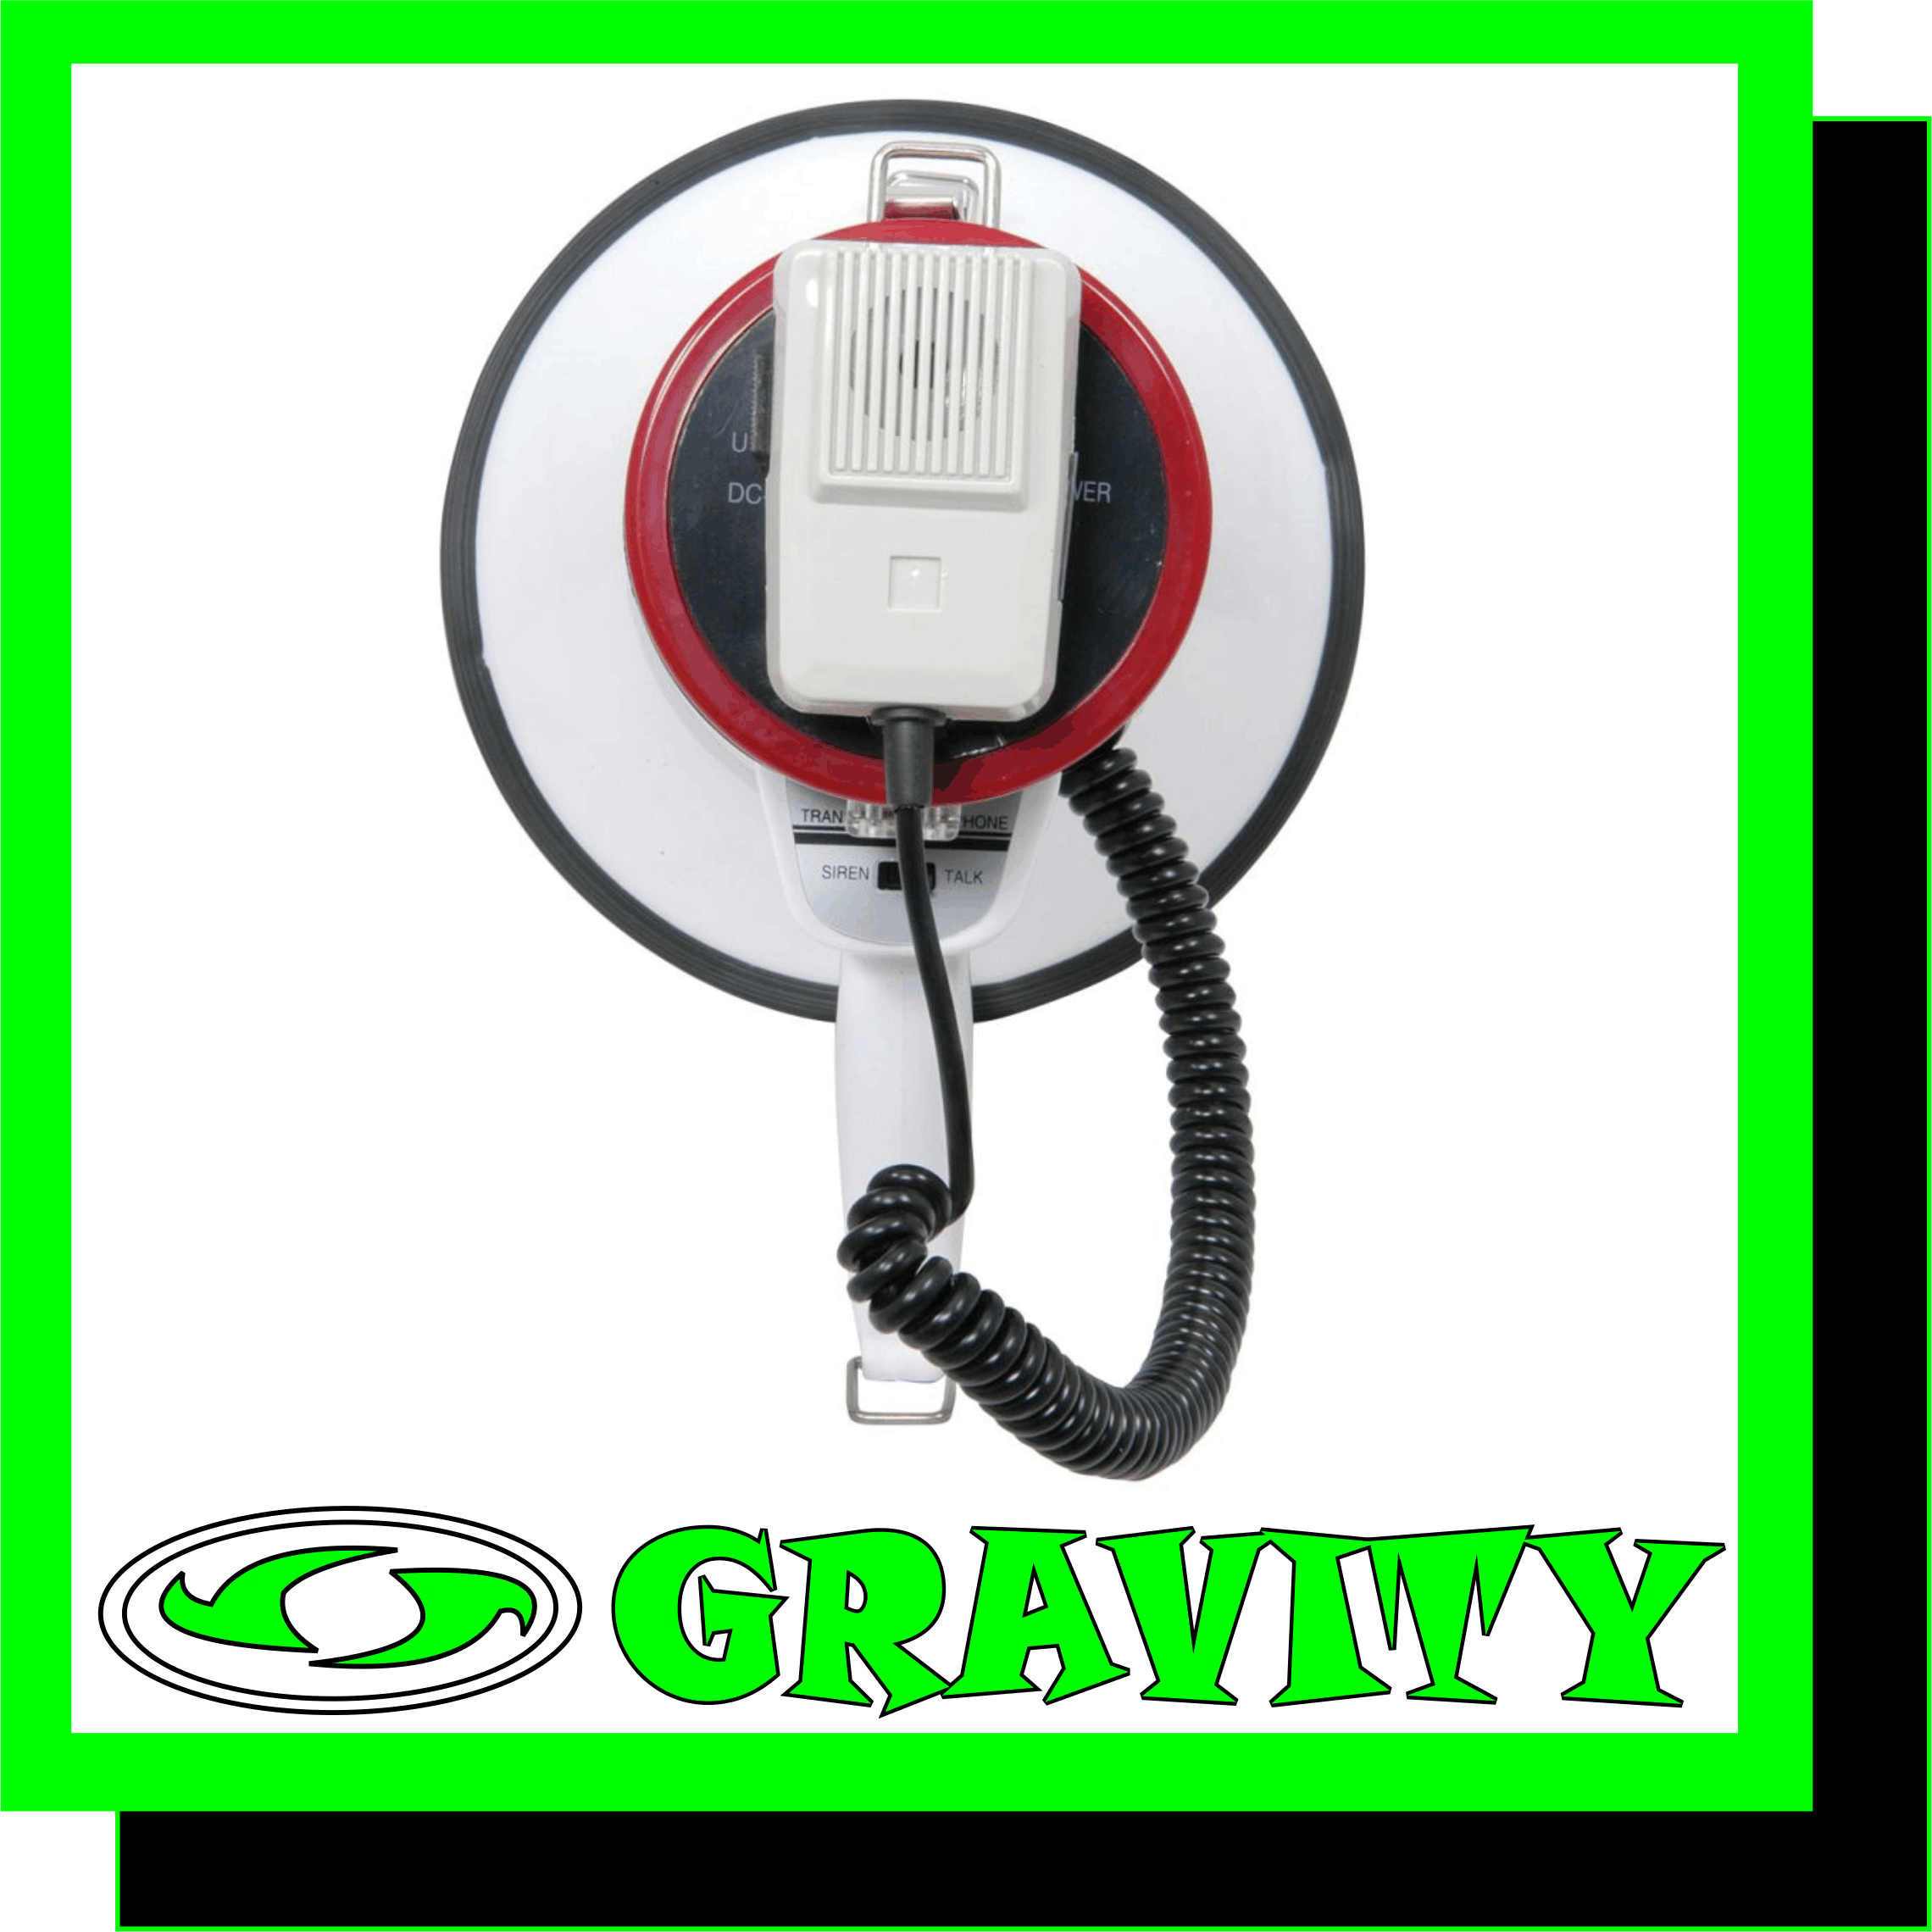 -30 watts megaphone loudhailer -talk function -siren to get fast attention -Hand held push to talk mic(external mic) -battery operated -600m range -Pistol grip GRAVITY AUDIO SOUND AND LIGHTING WAREHOUSE 0315072736